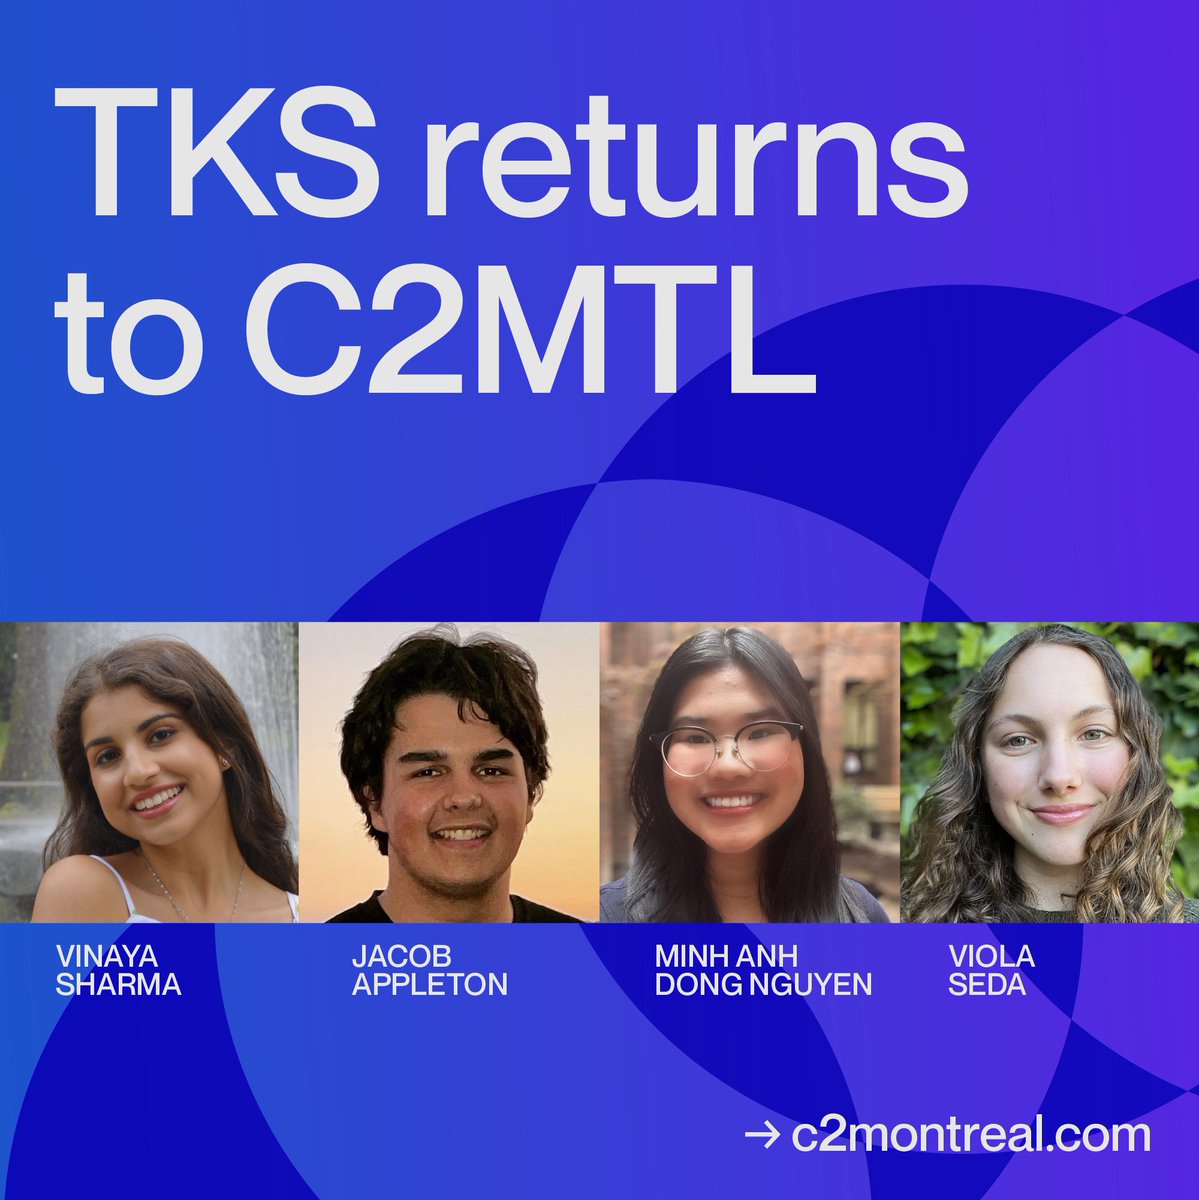 Age ain't nothing but a number. #C2MTL23 will welcome @tksworldhq back to the ecosystem with 4 teenage speakers bringing their foresight to the table, preparing us for the incoming generation. Tap into the next gen. Buy your pass to #C2MTL23 now: c2montreal.com